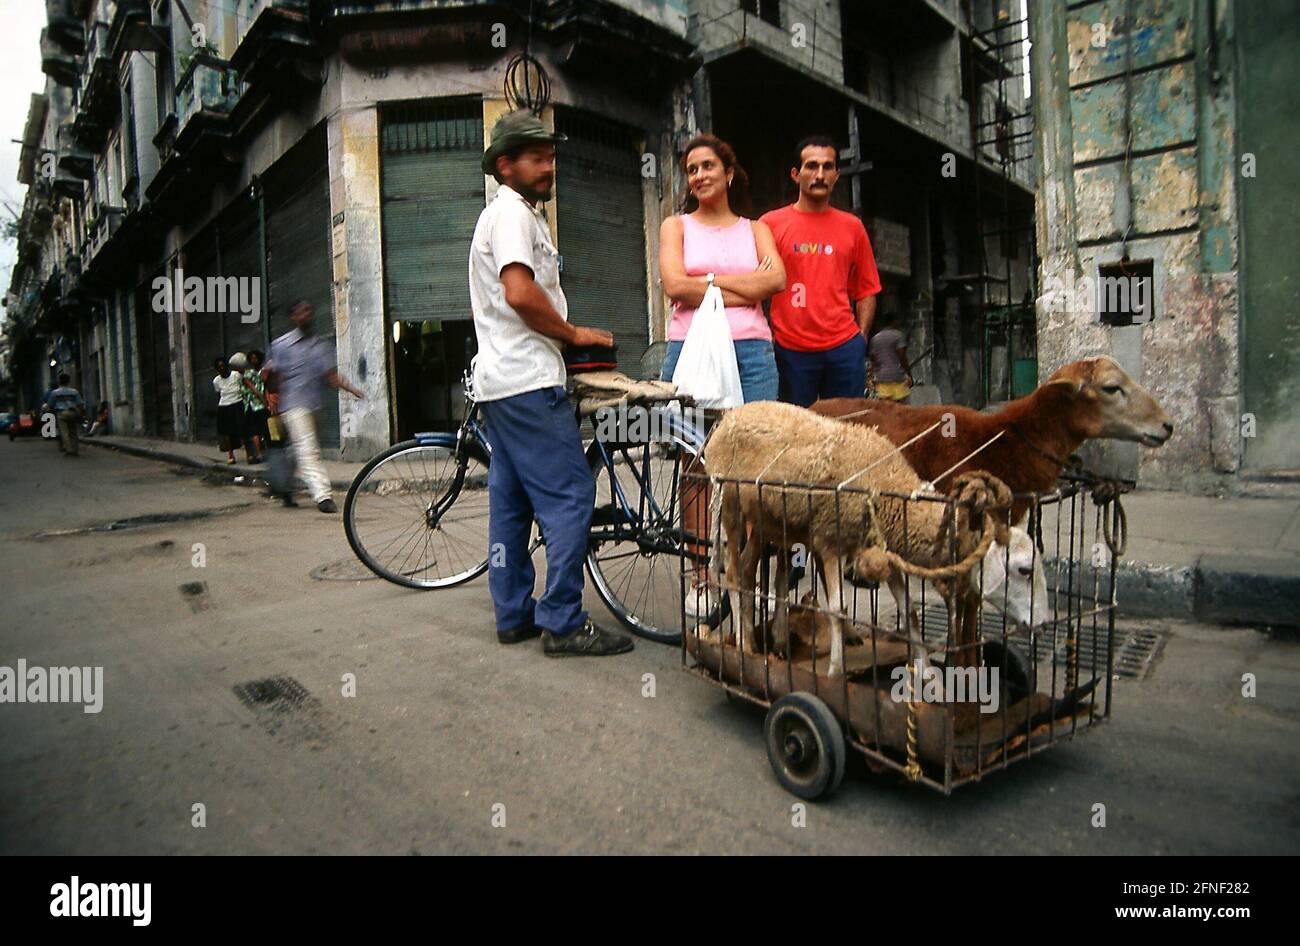 Meeting on a street in Havana, two sheep are carried. [automated translation] Stock Photo